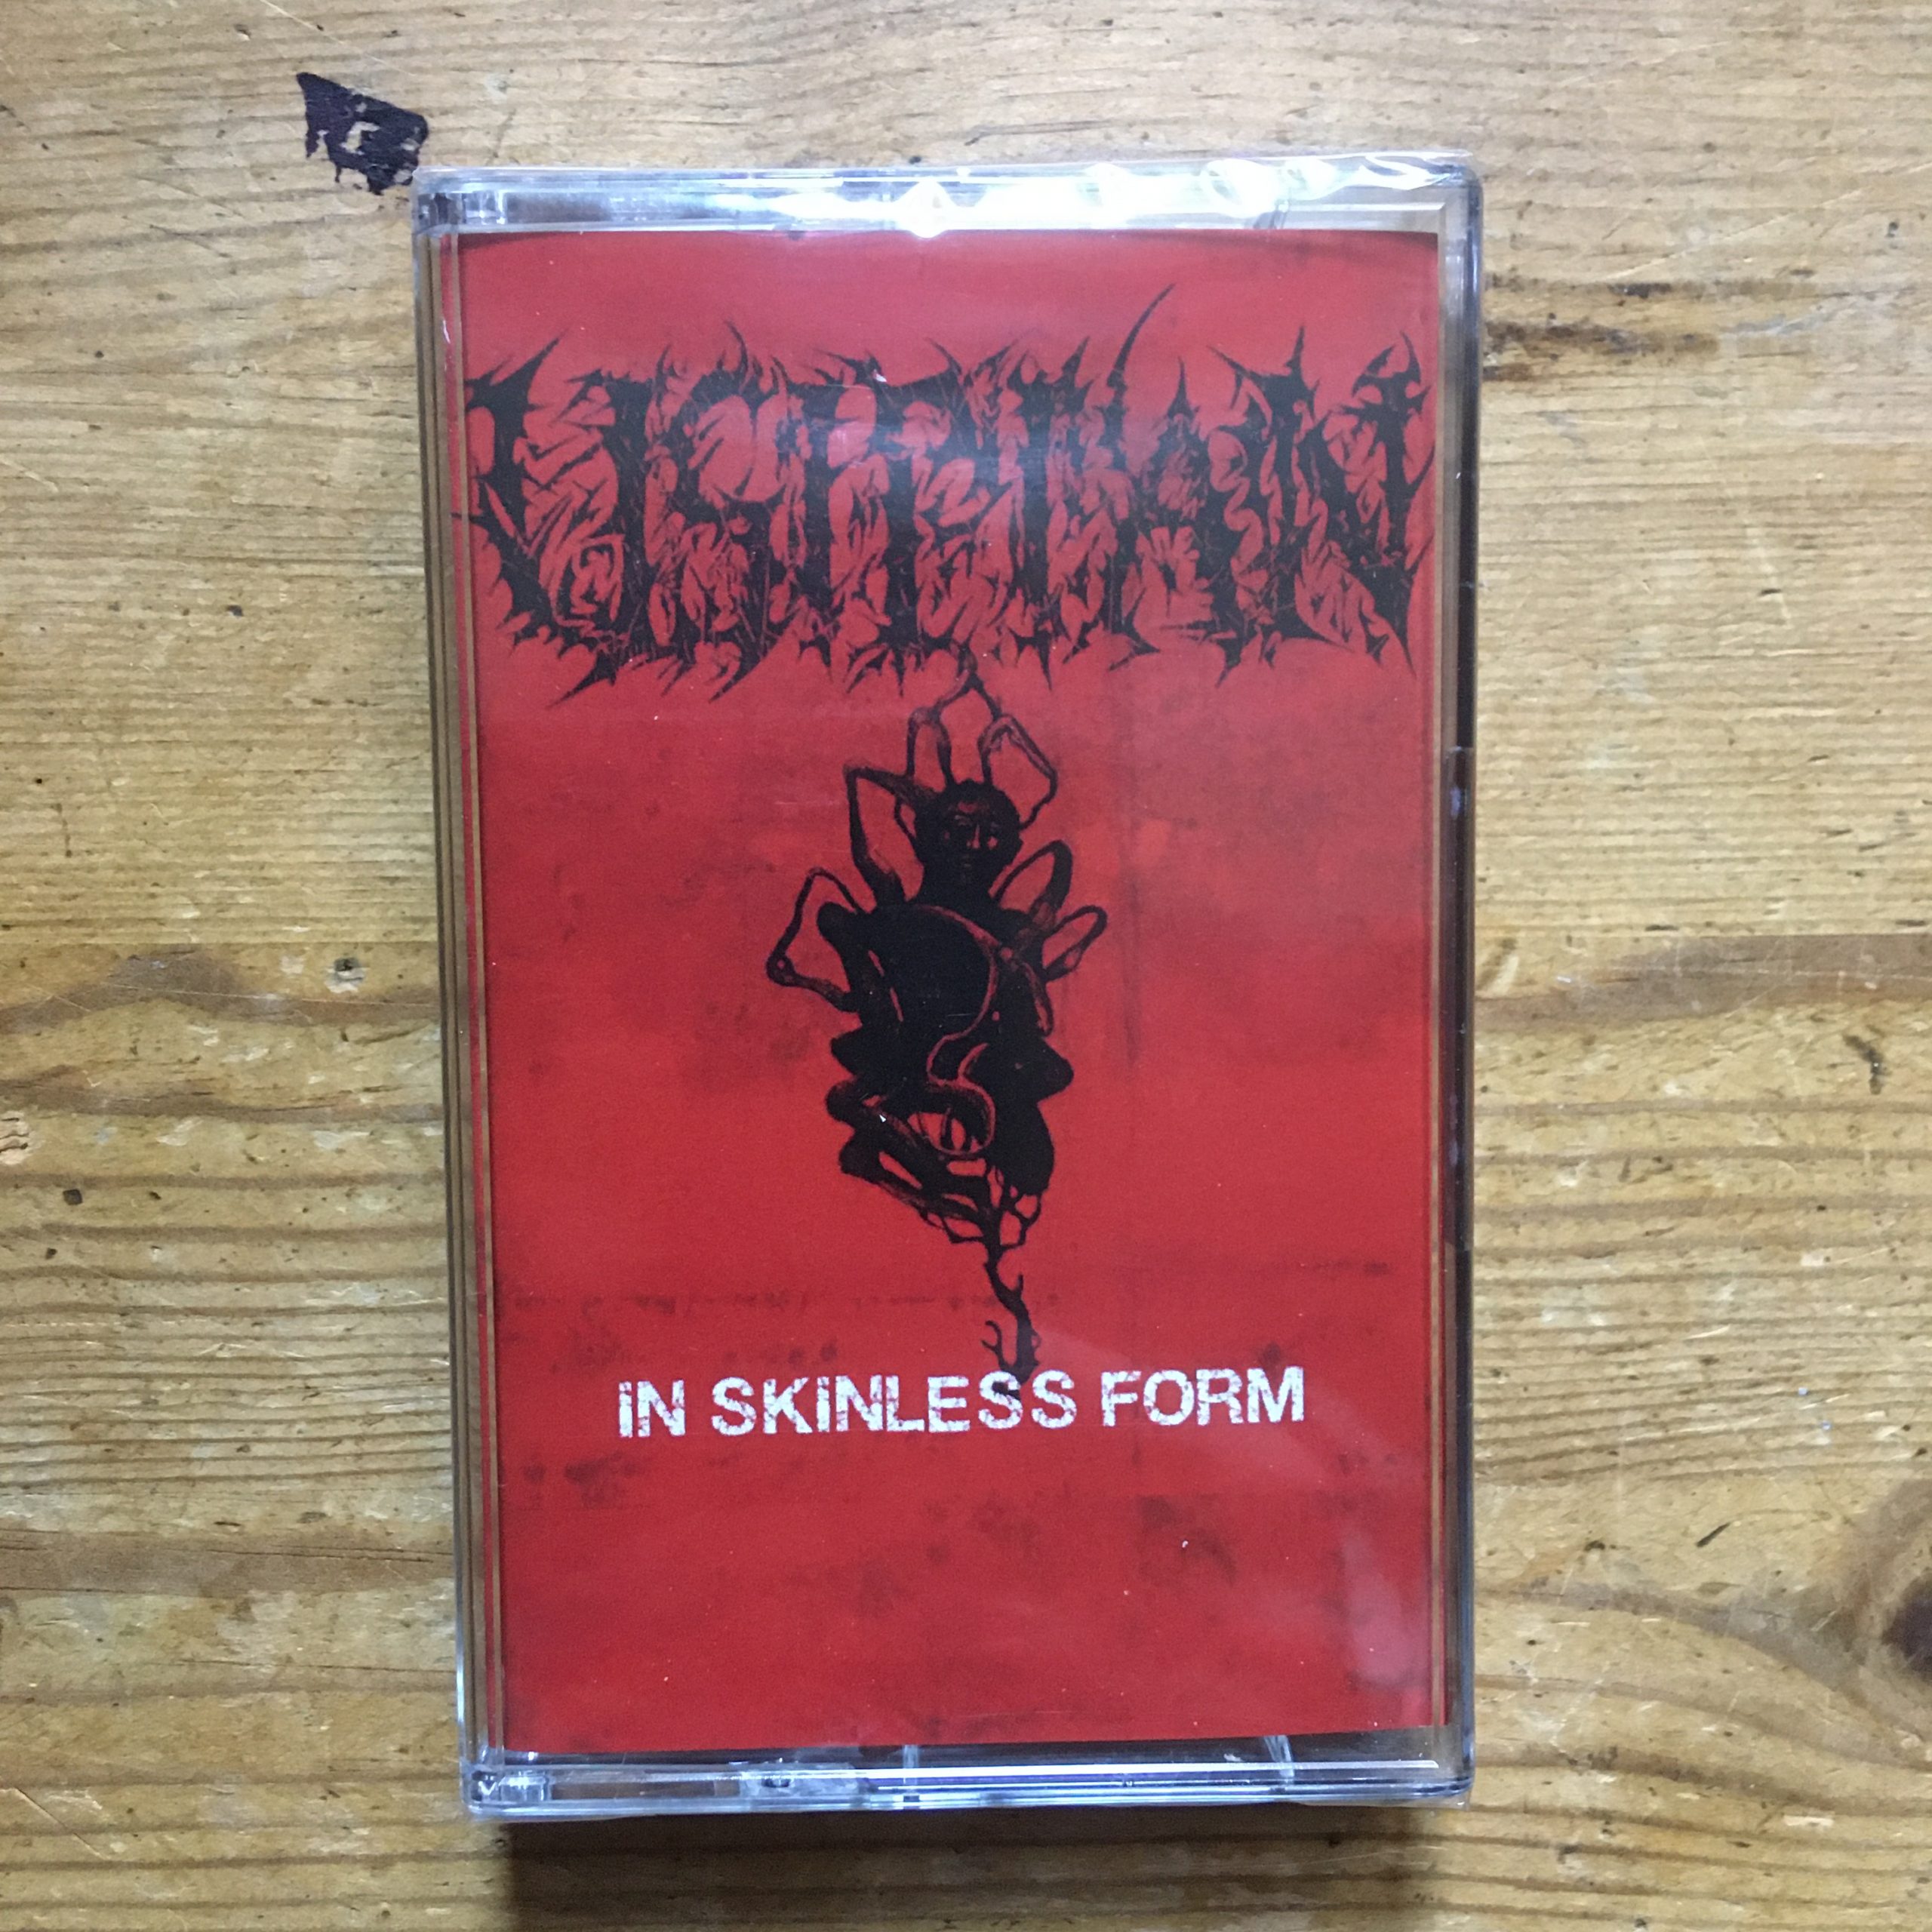 Photo of the Usipian - "In Skinless Form" MC